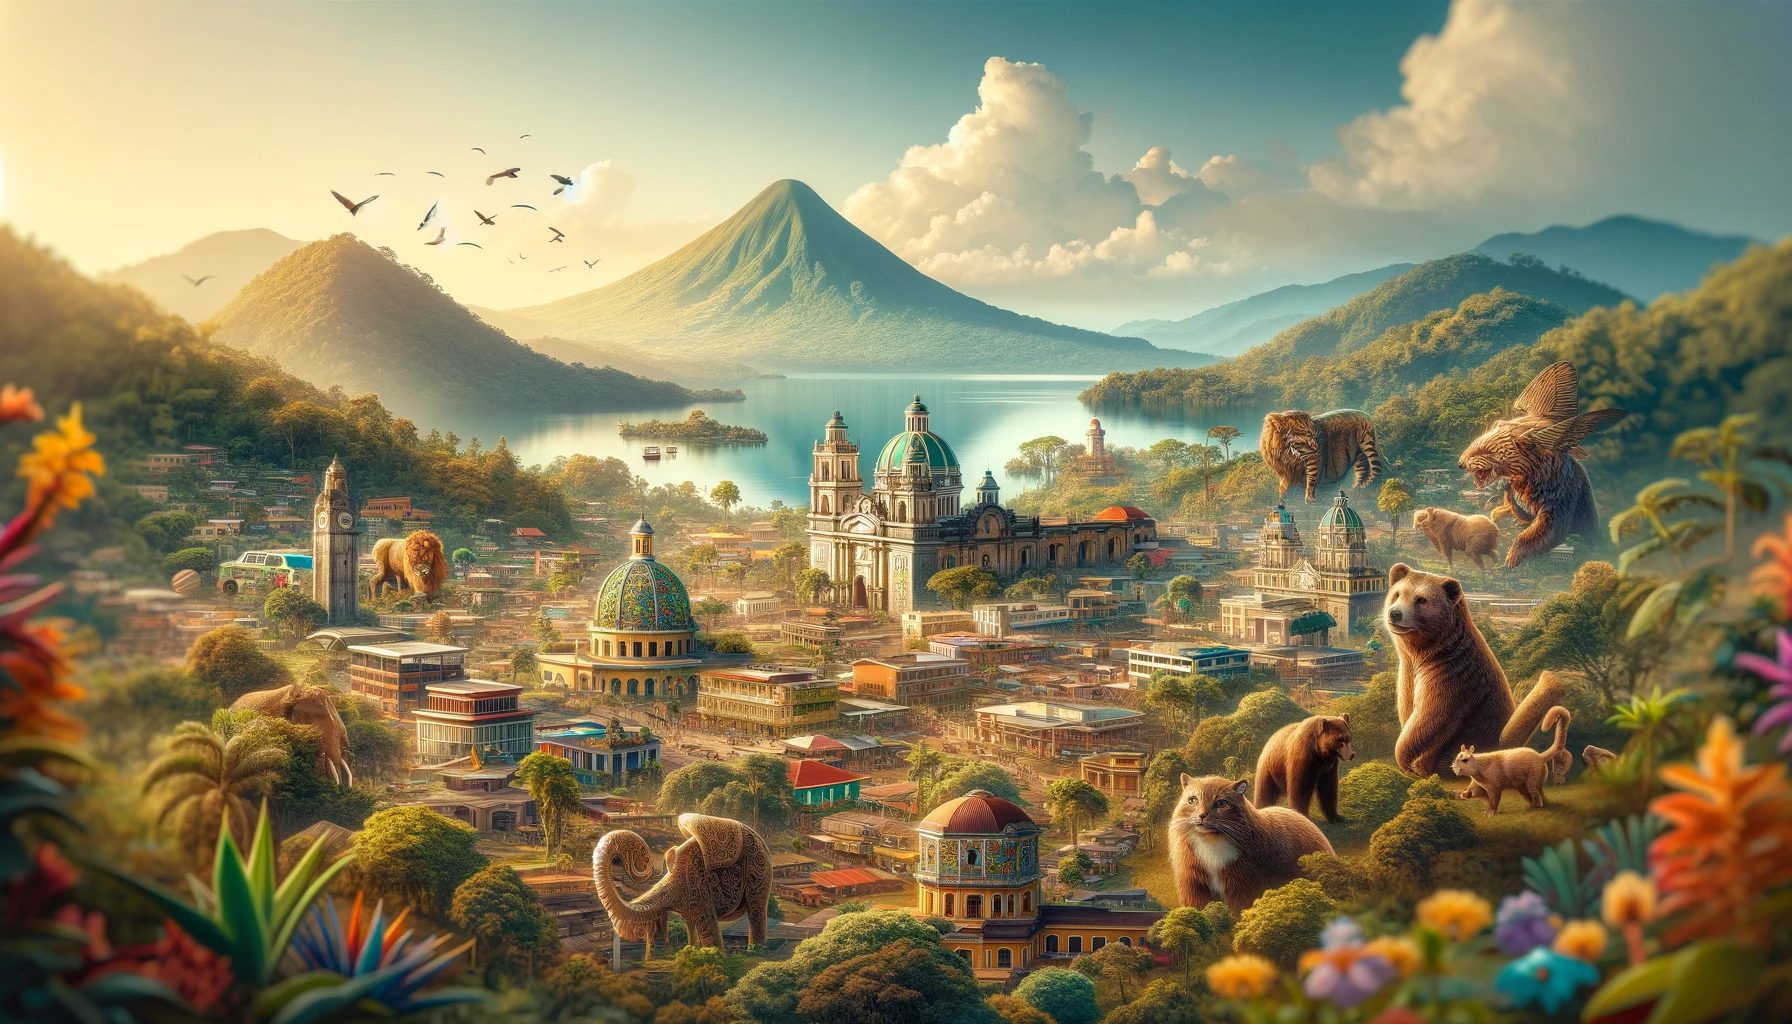 Fantasy landscape with animals and a volcanic mountain.